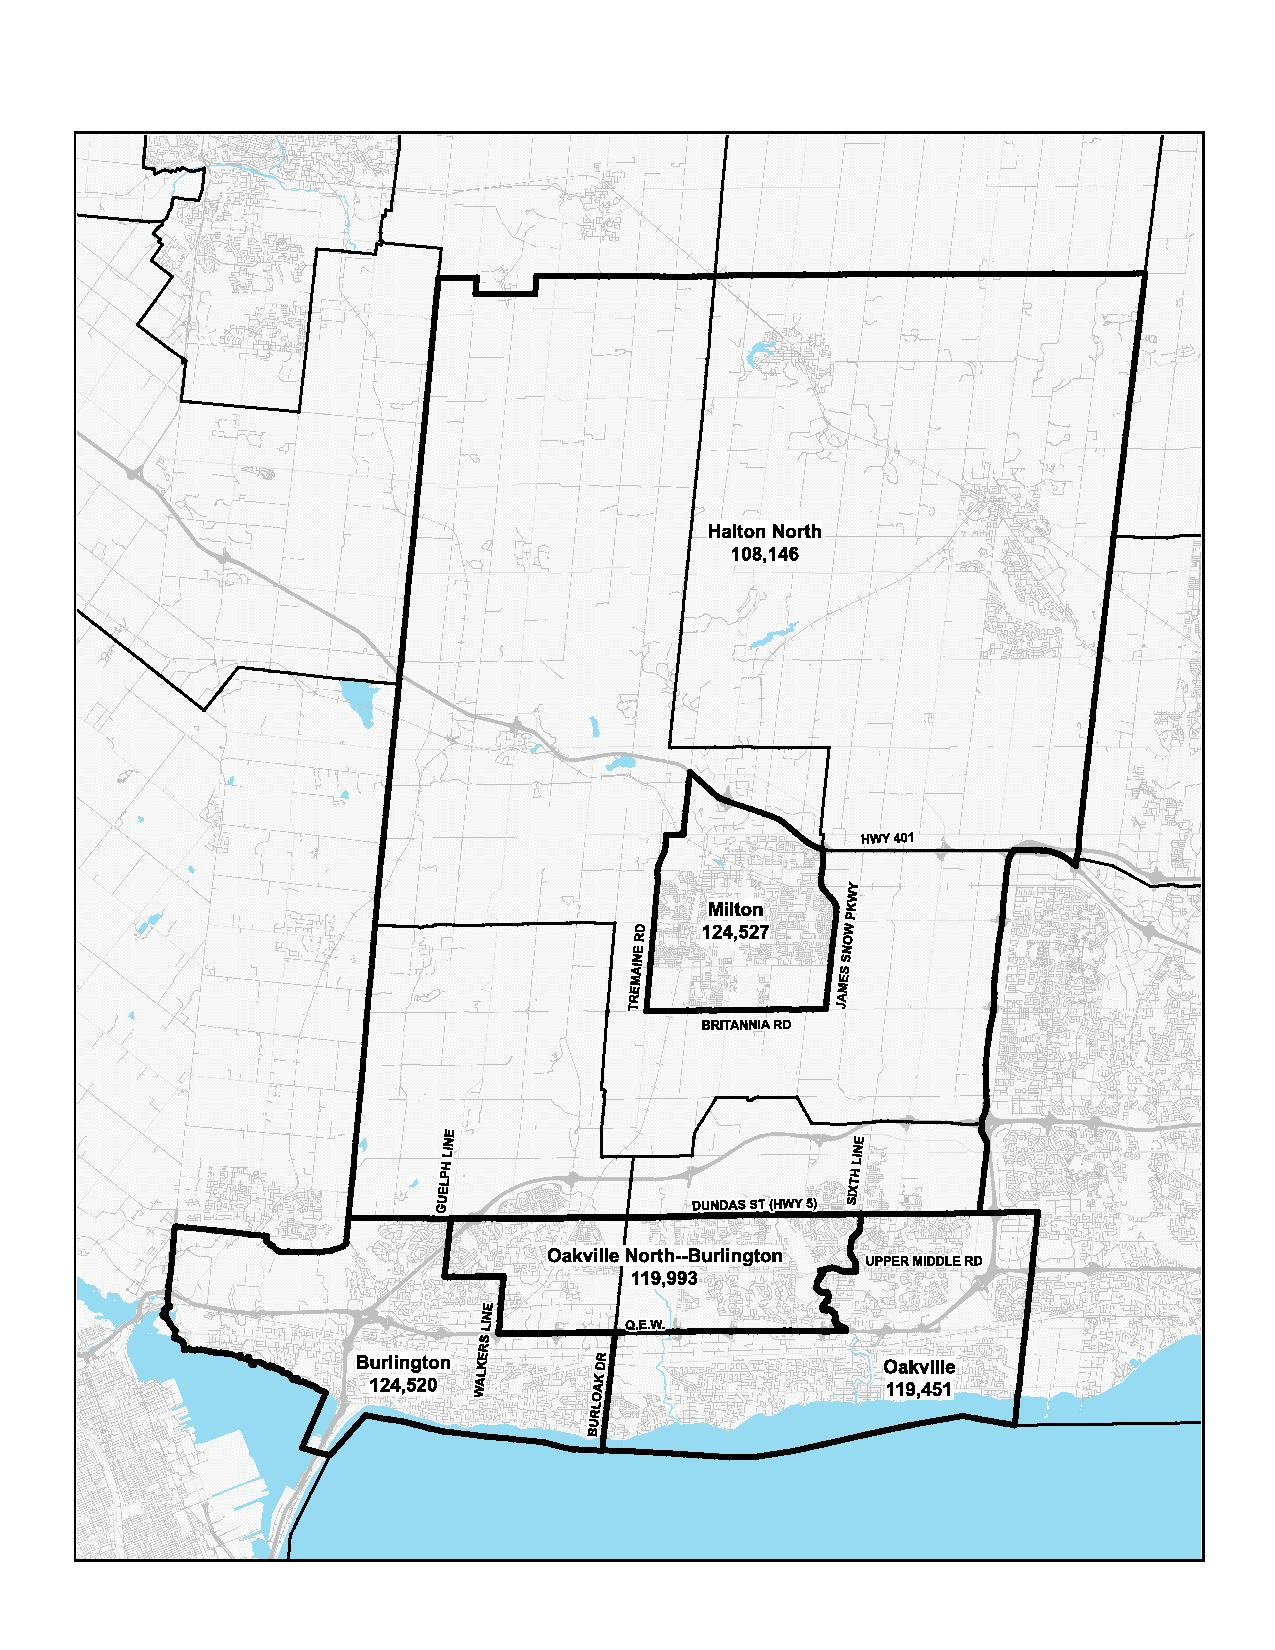 Image shows a map that is described in the written part of the submission.